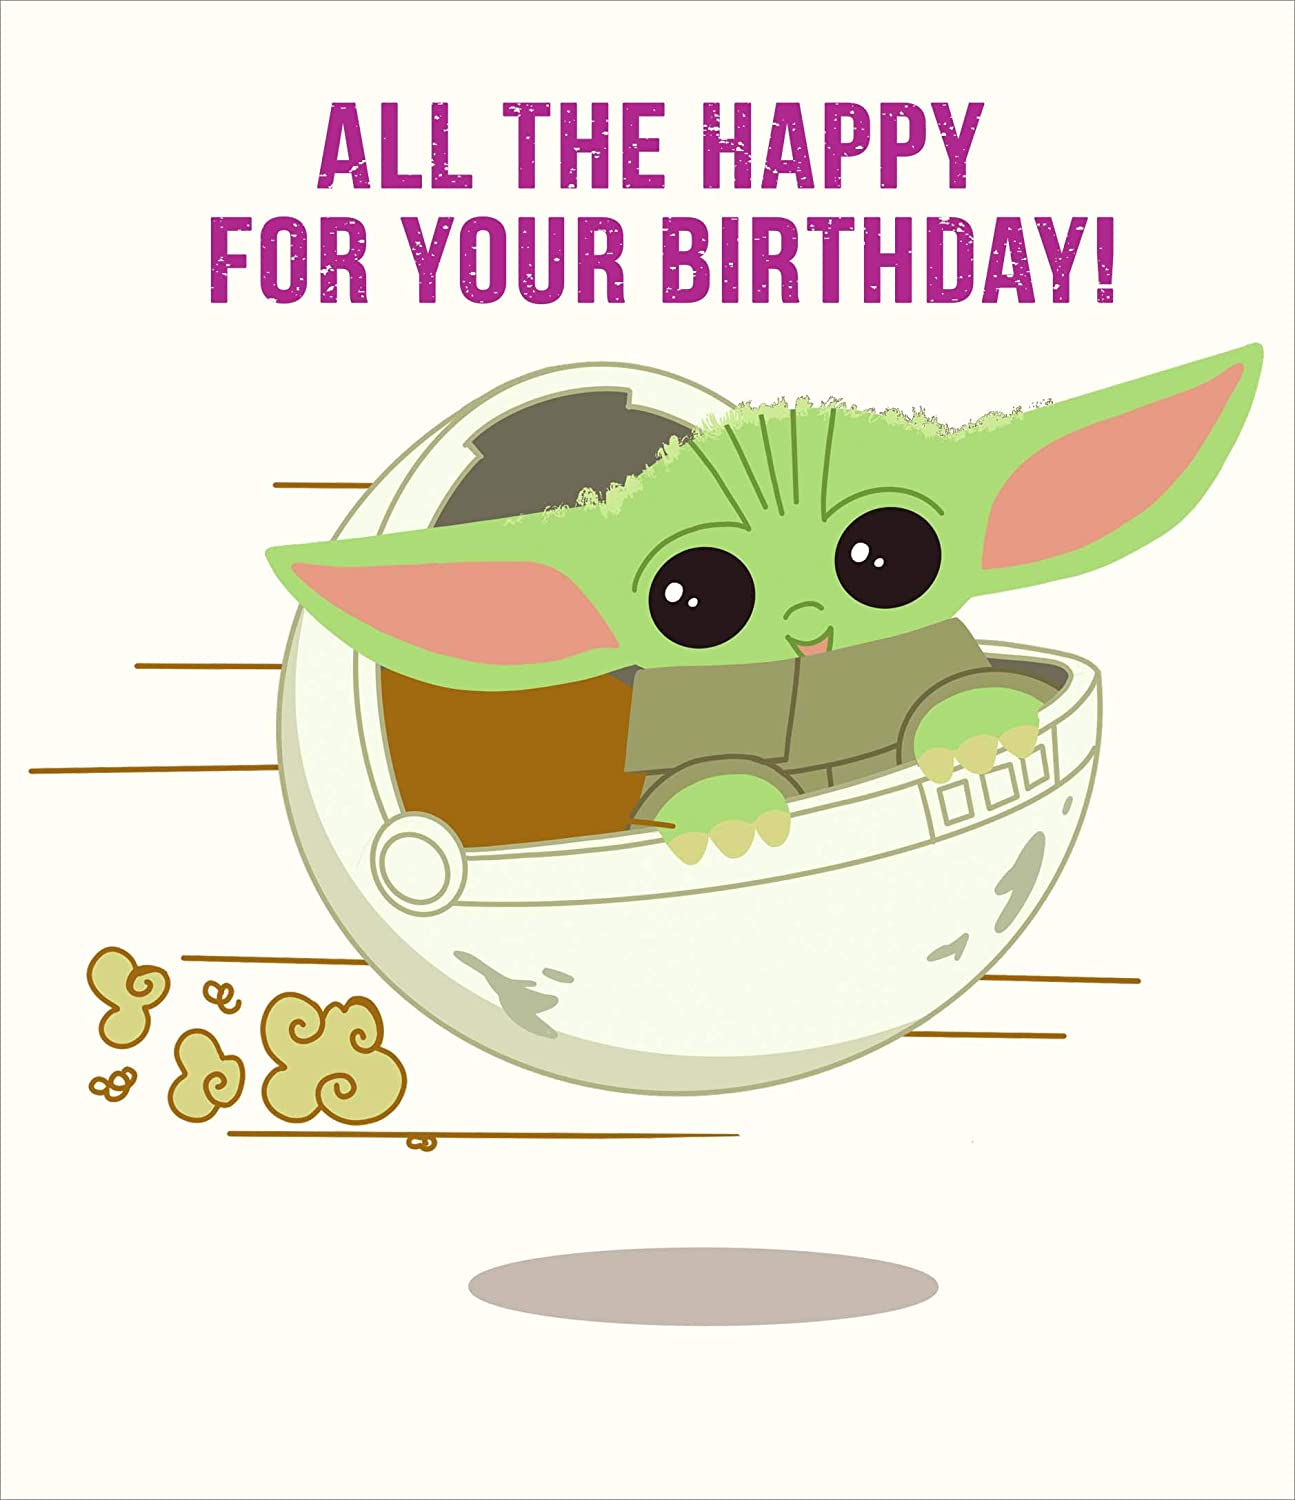 All The Happy Star Wars Baby Birthday Card – Evercarts